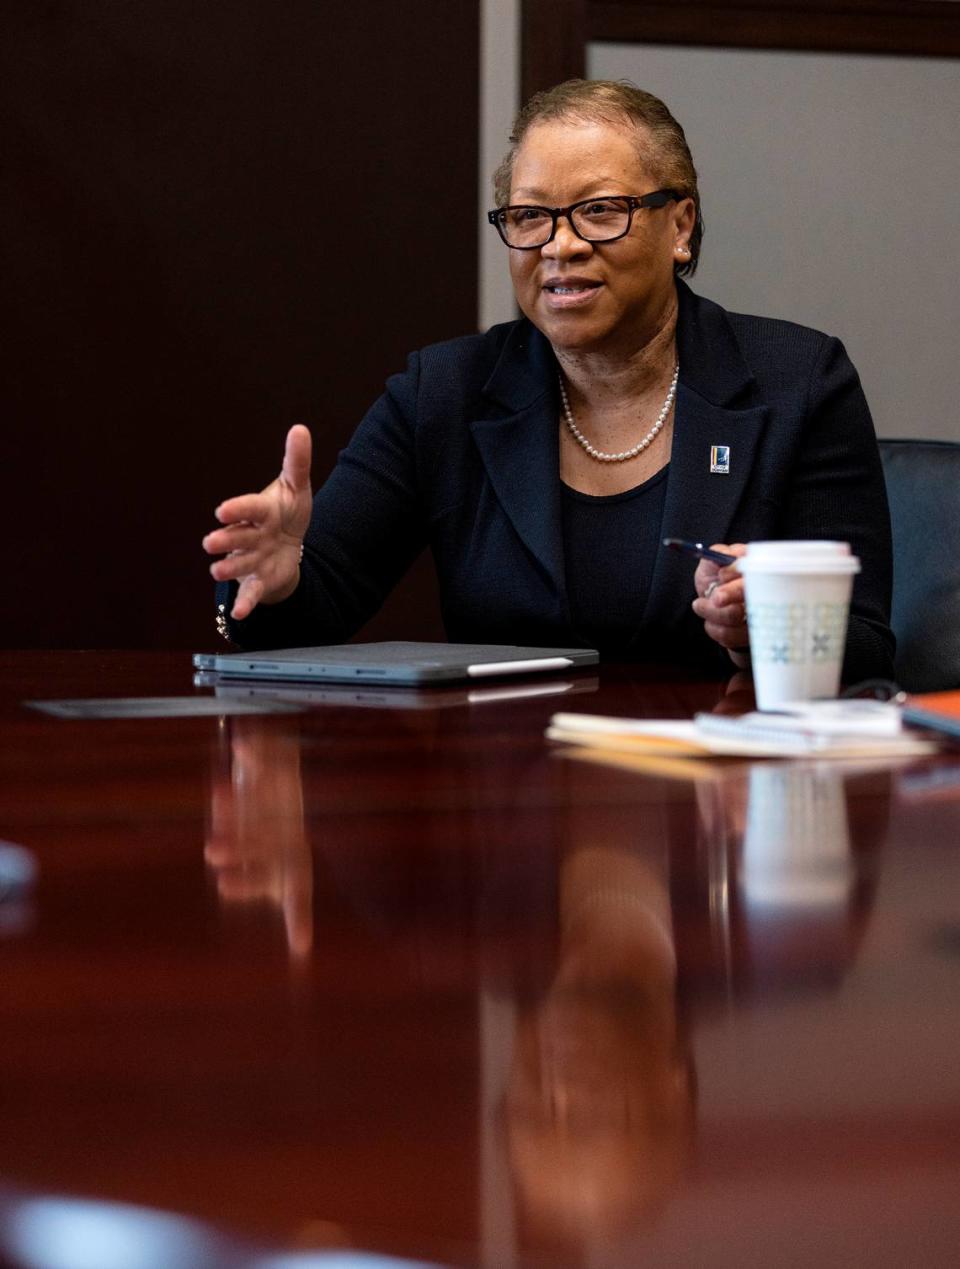 Durham City Manager Wanda Page speaks during an interview at Durham City Hall on Wednesday, March 1, 2023, in Durham, N.C.